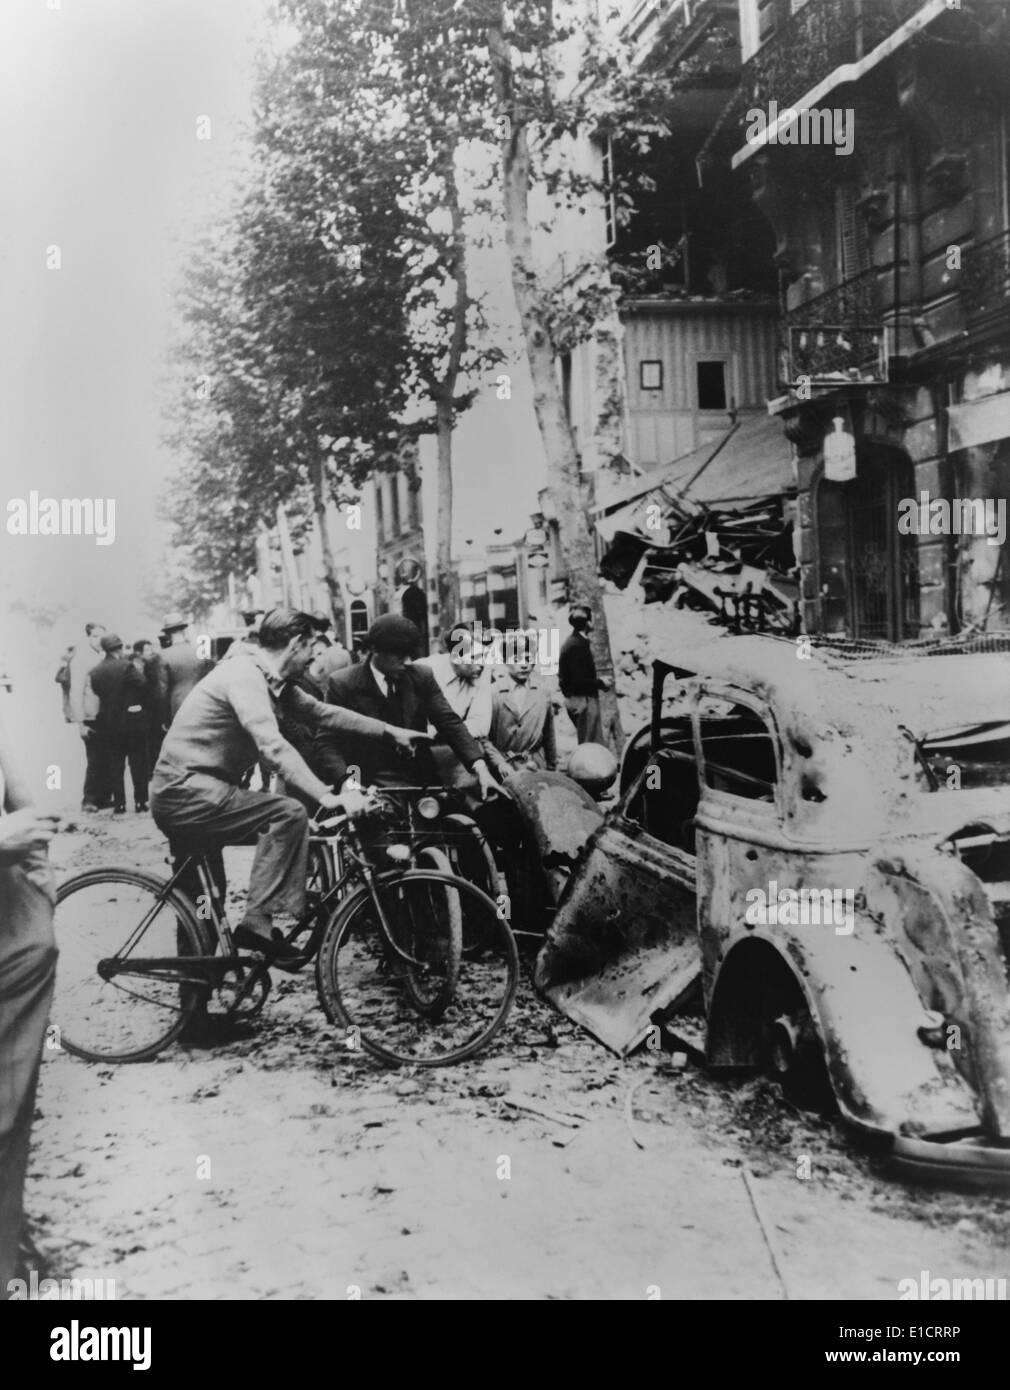 Parisians gather around a car and a home destroyed by German bombs. World War 2, ca. May-June 1940. (BSLOC 2013 11 61) Stock Photo